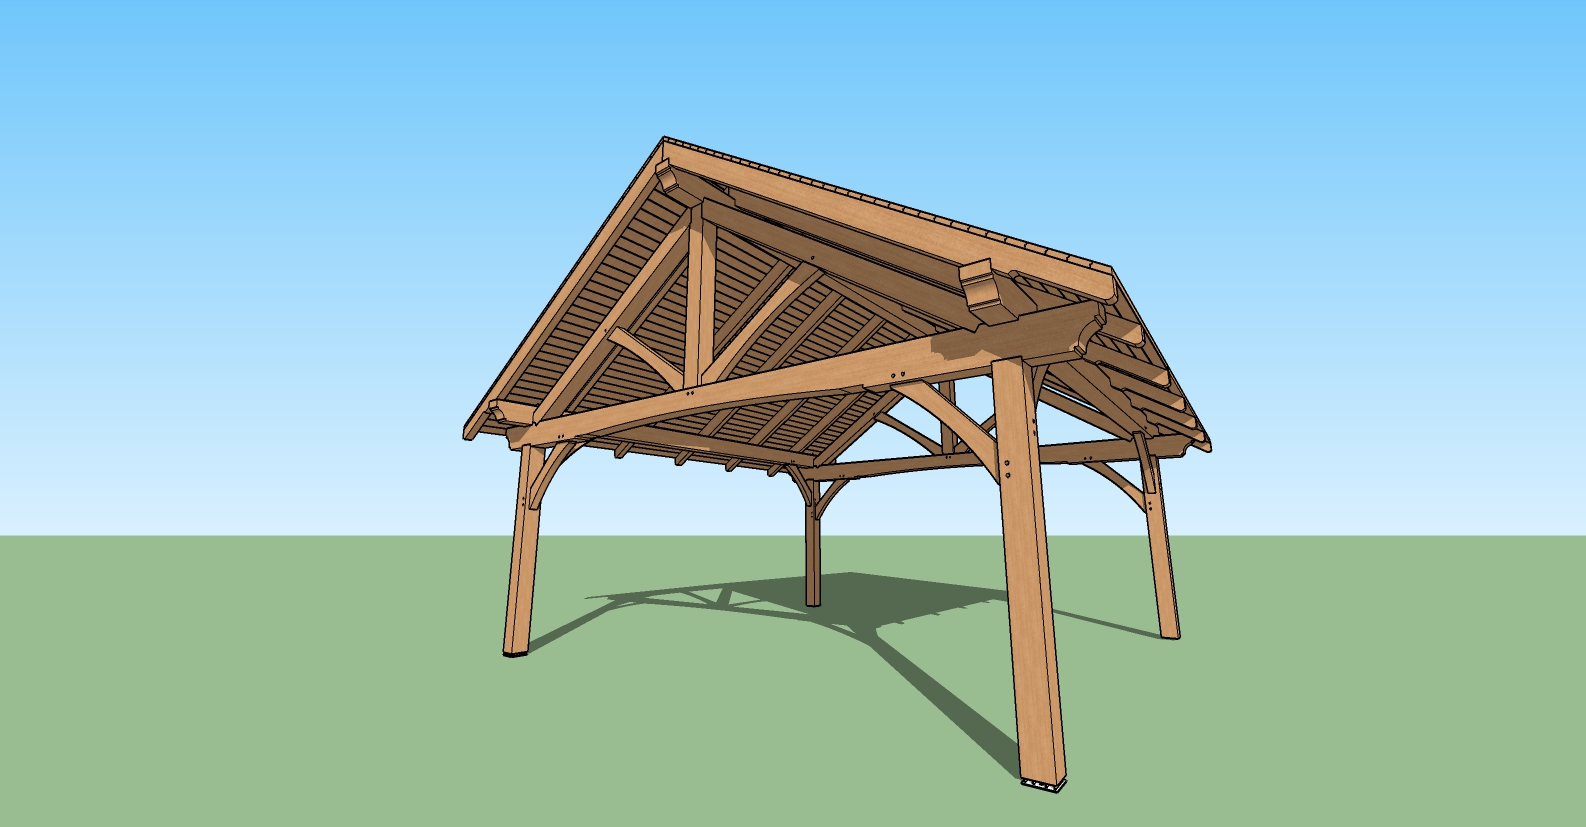 A wooden structure with an open roof.